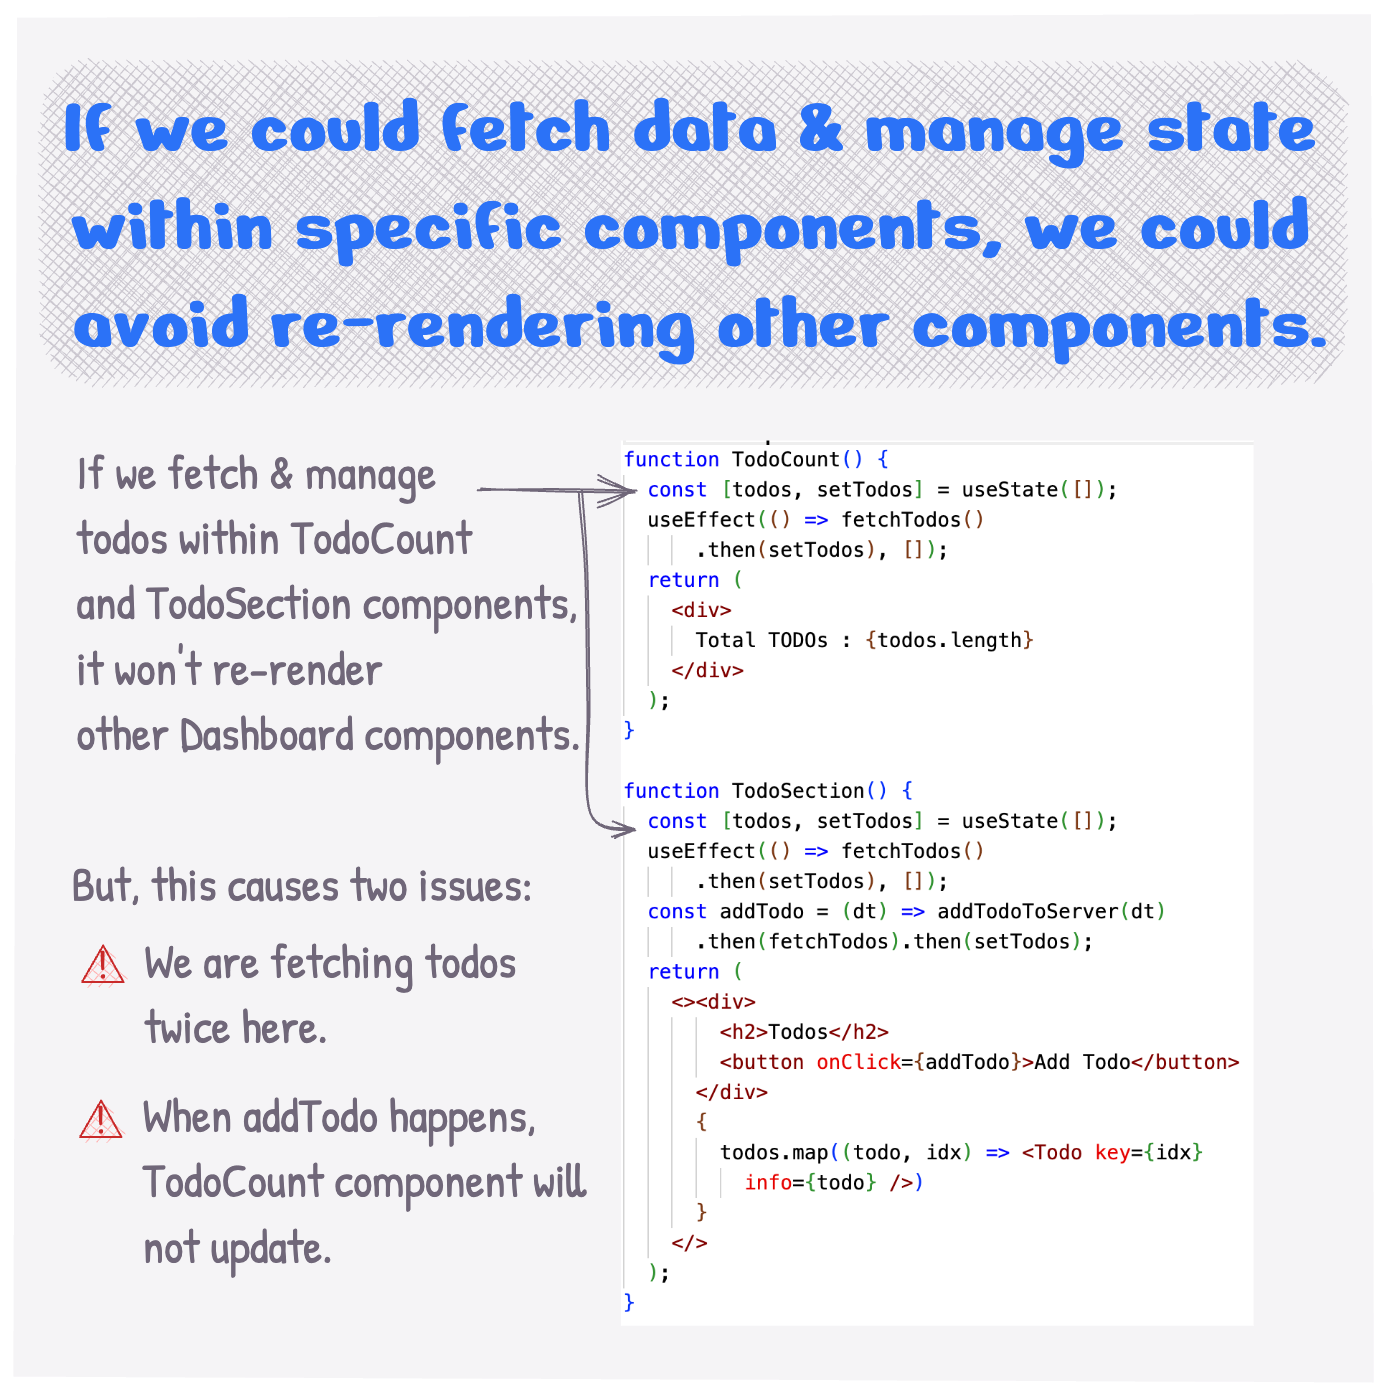 If we could fetch data & manage state within certain components, we could avoid re-rendering other components.